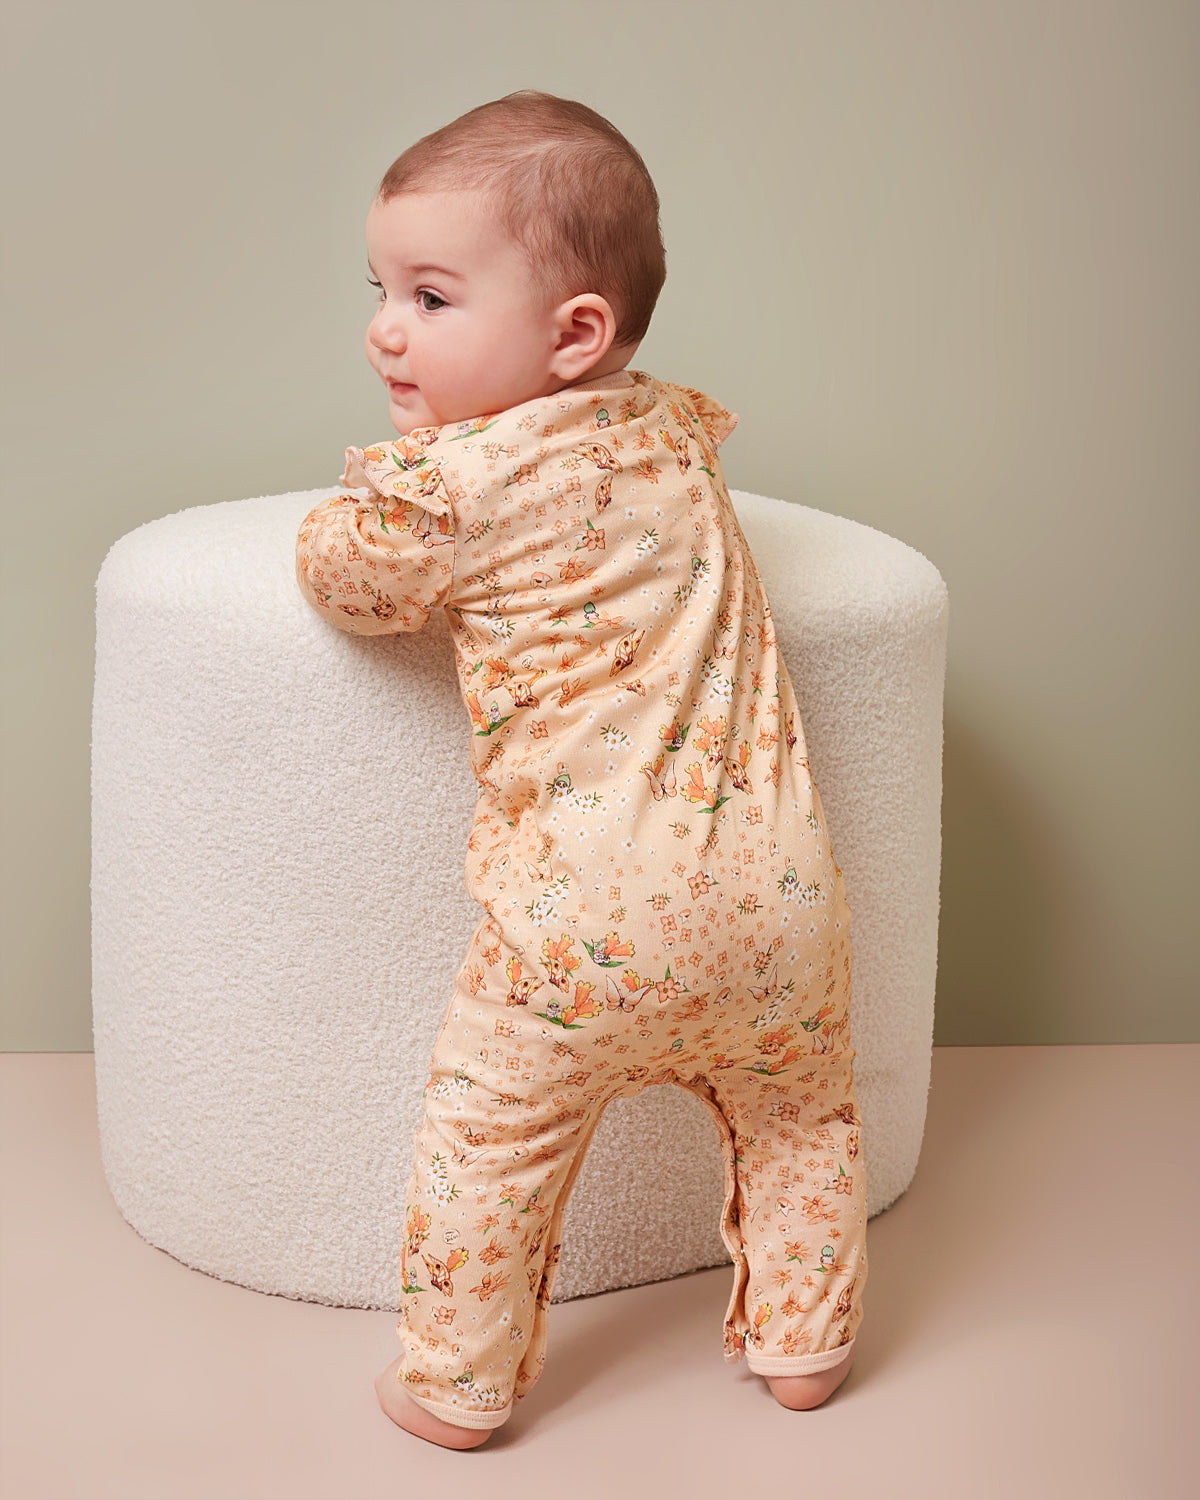 May Gibbs Scout Frill Onesie